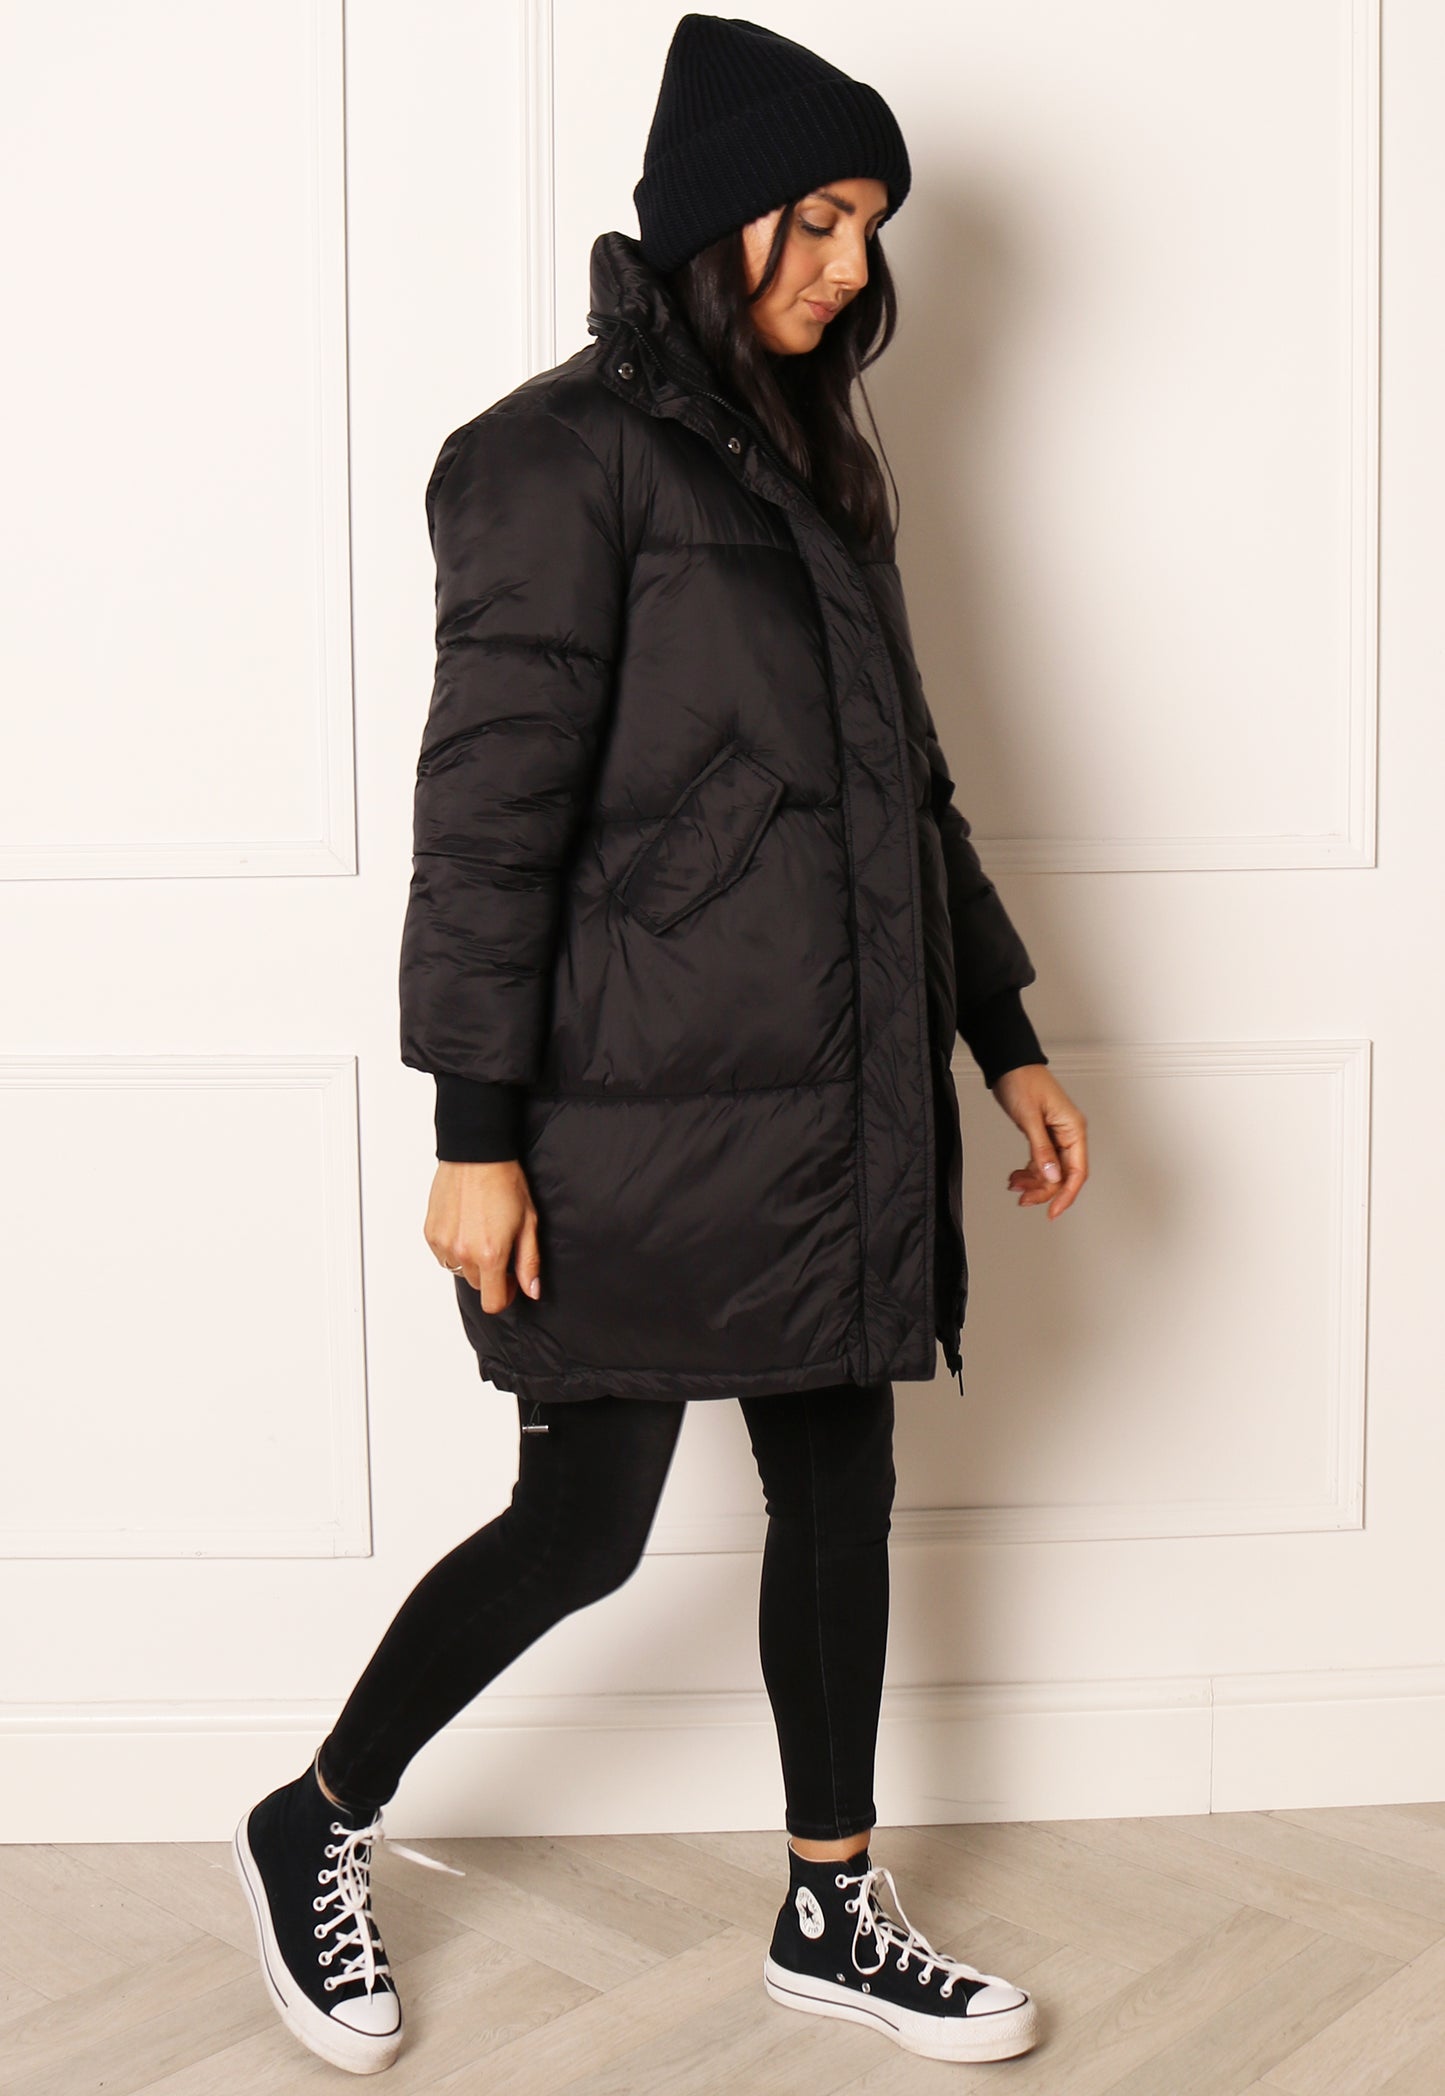 ONLY Petra Oversized Longline Puffer Coat with Foldaway Hood in Black - One Nation Clothing